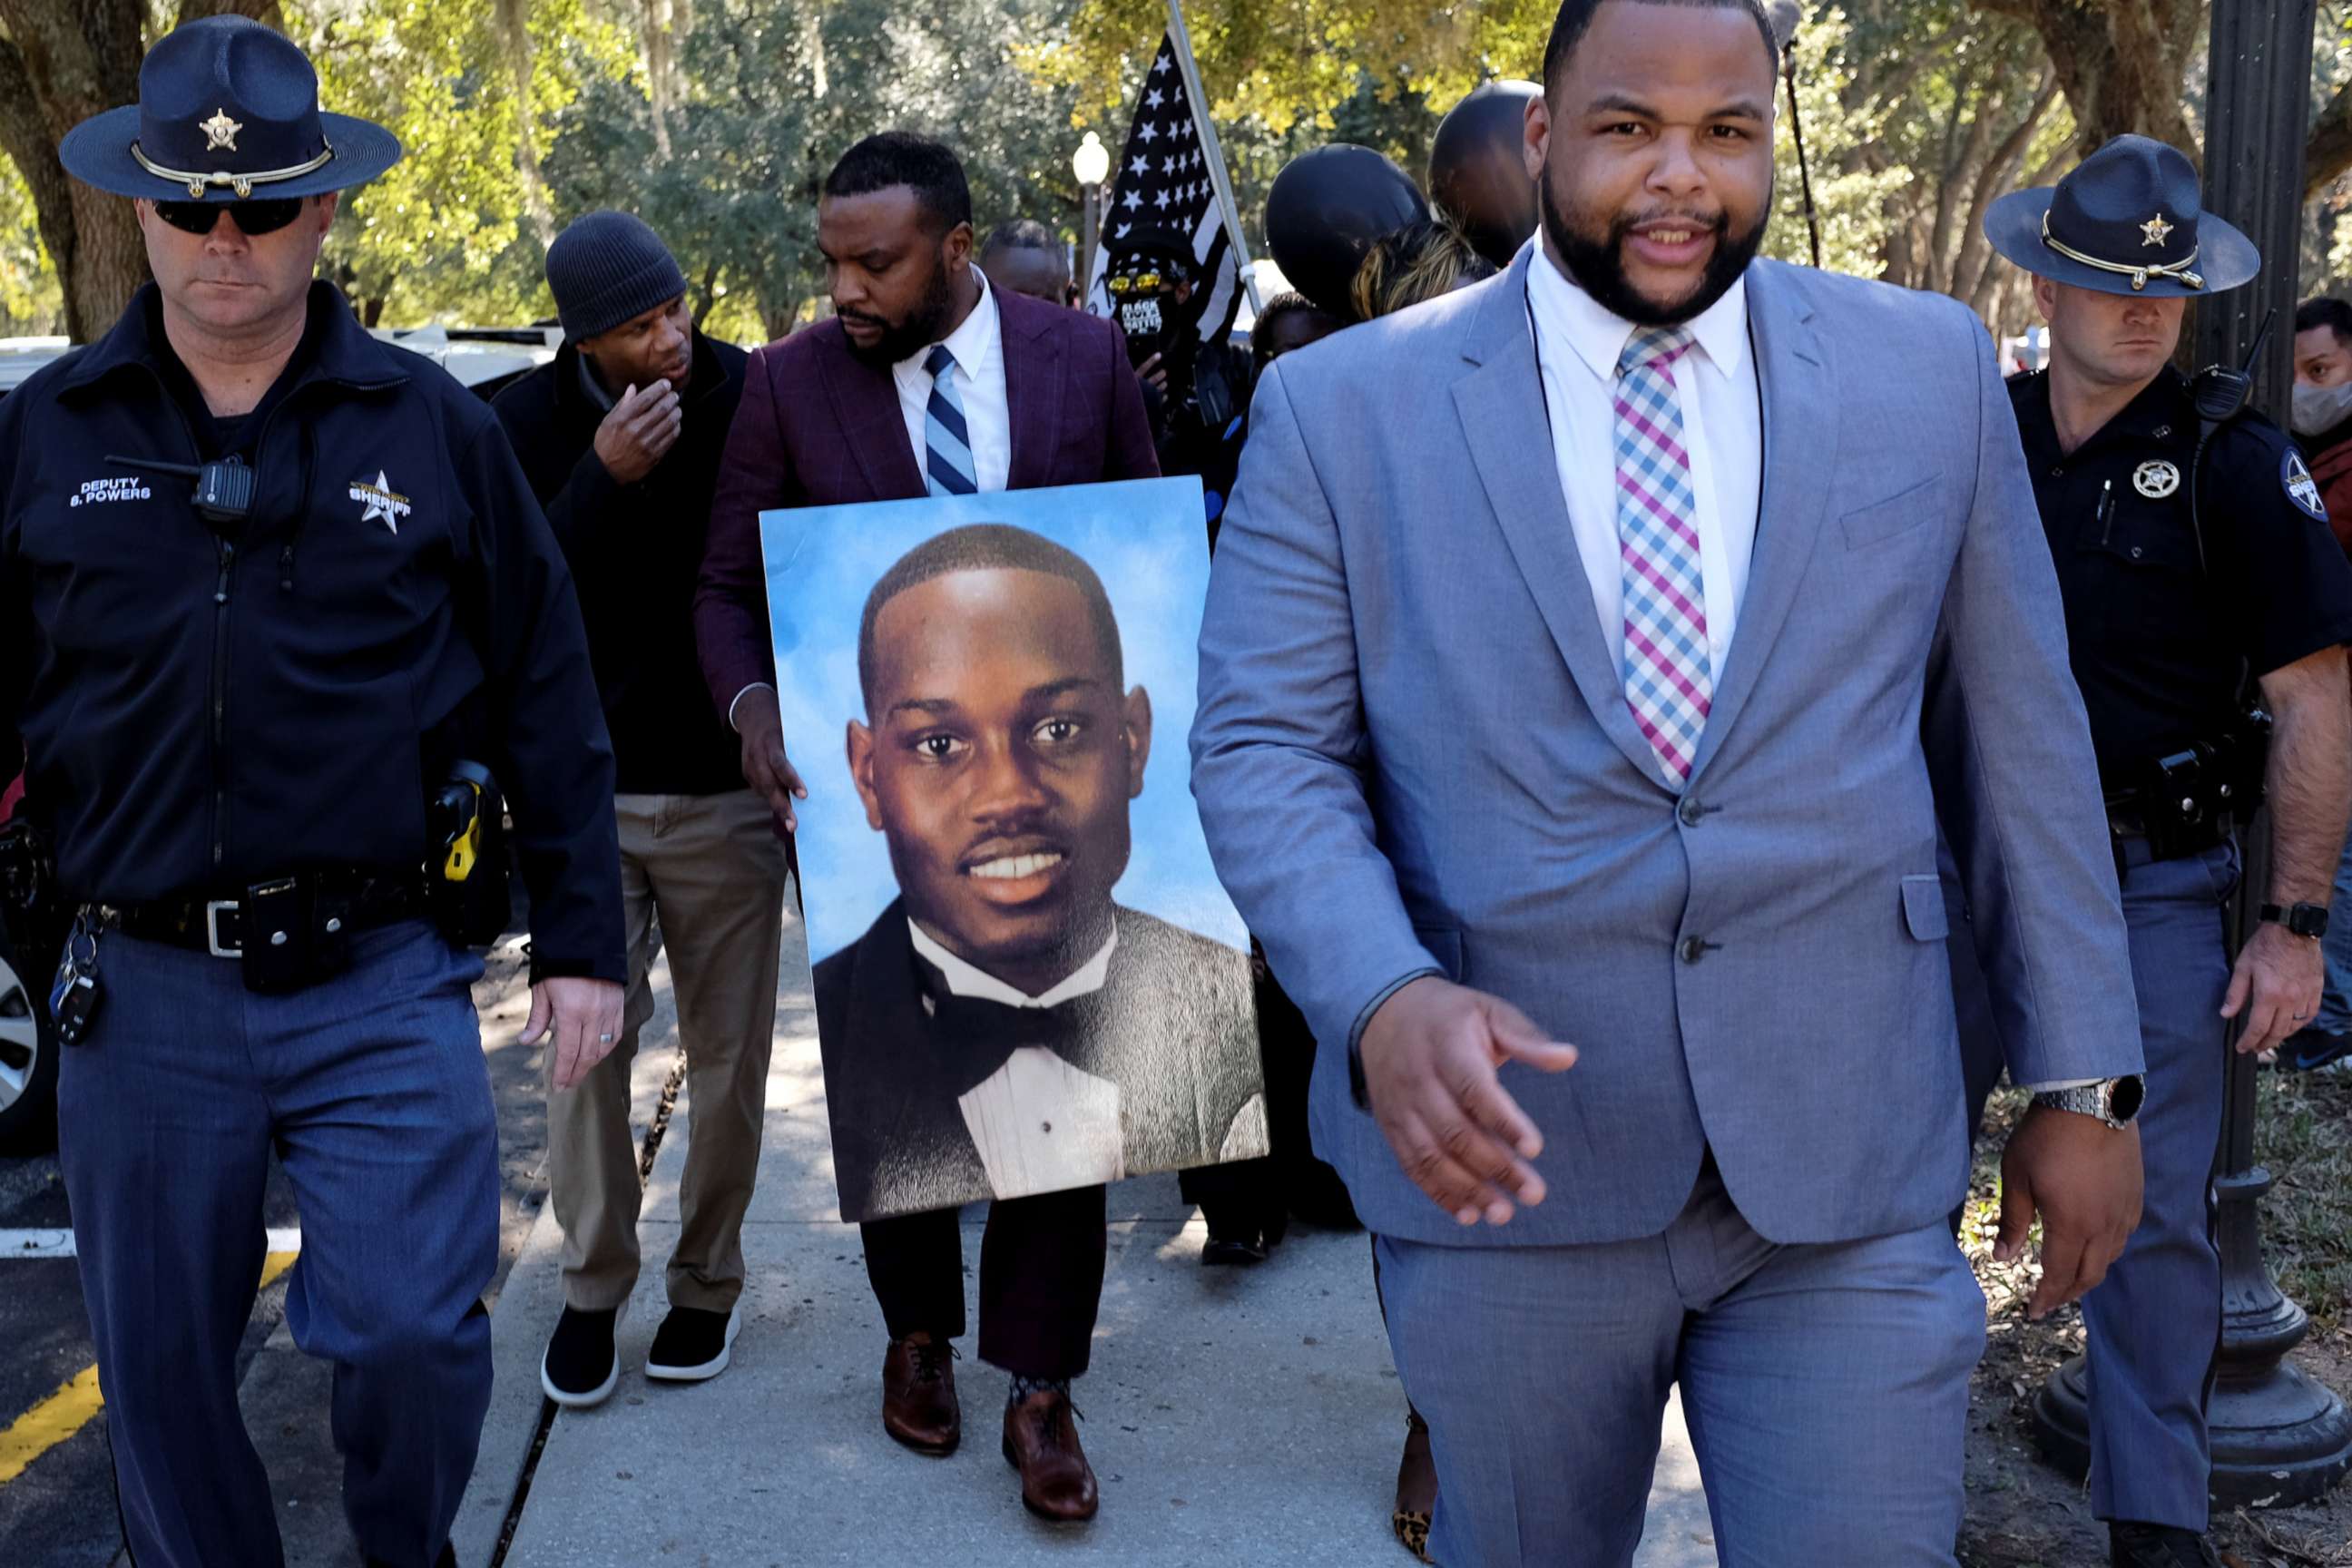 PHOTO: Attorney Lee Merritt holds a poster depicting Ahmaud Arbery as he leaves the courthouse as jury begins deliberating whether Greg McMichael, Travis McMichael and William "Roddie" Bryan murdered Ahmaud Arbery, in Brunswick, Ga., Nov. 23, 2021.